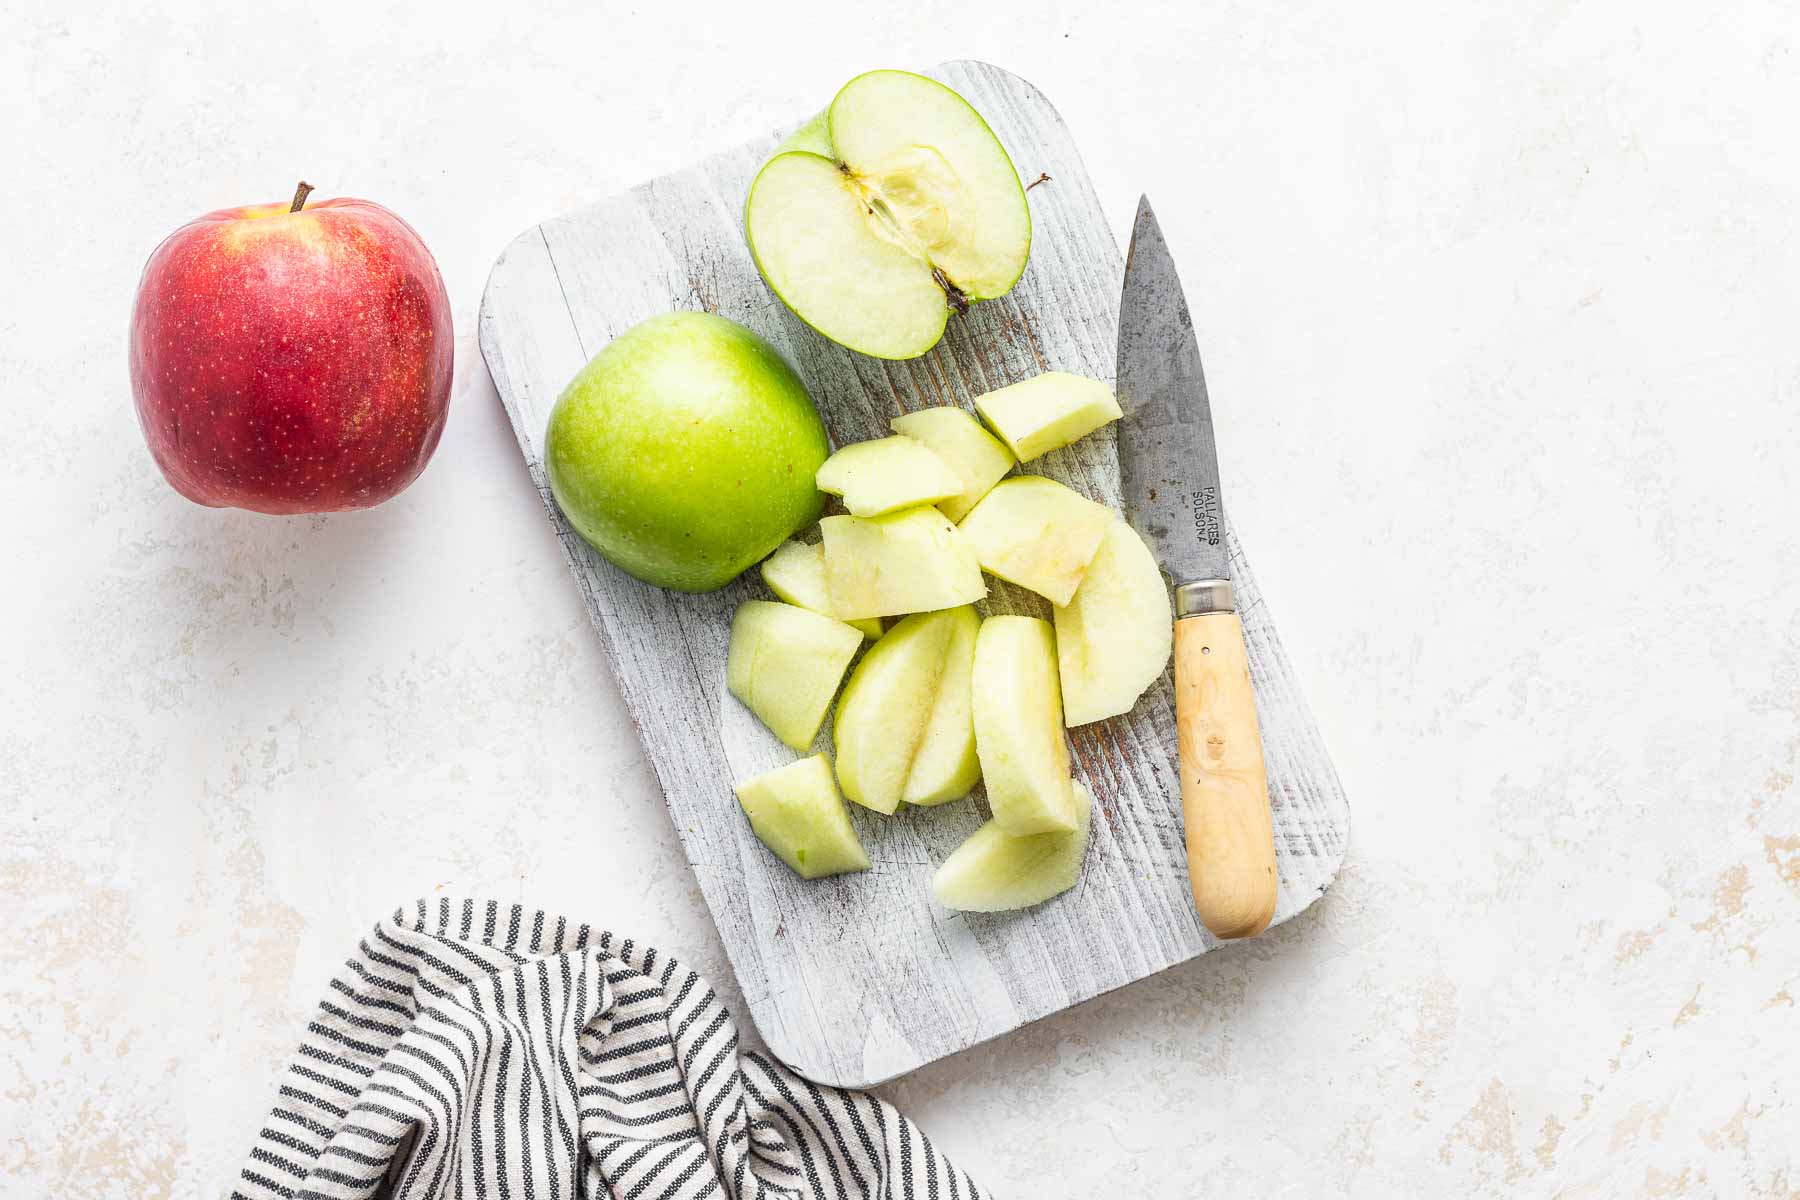 Peeled and sliced apples on cutting board with knife.